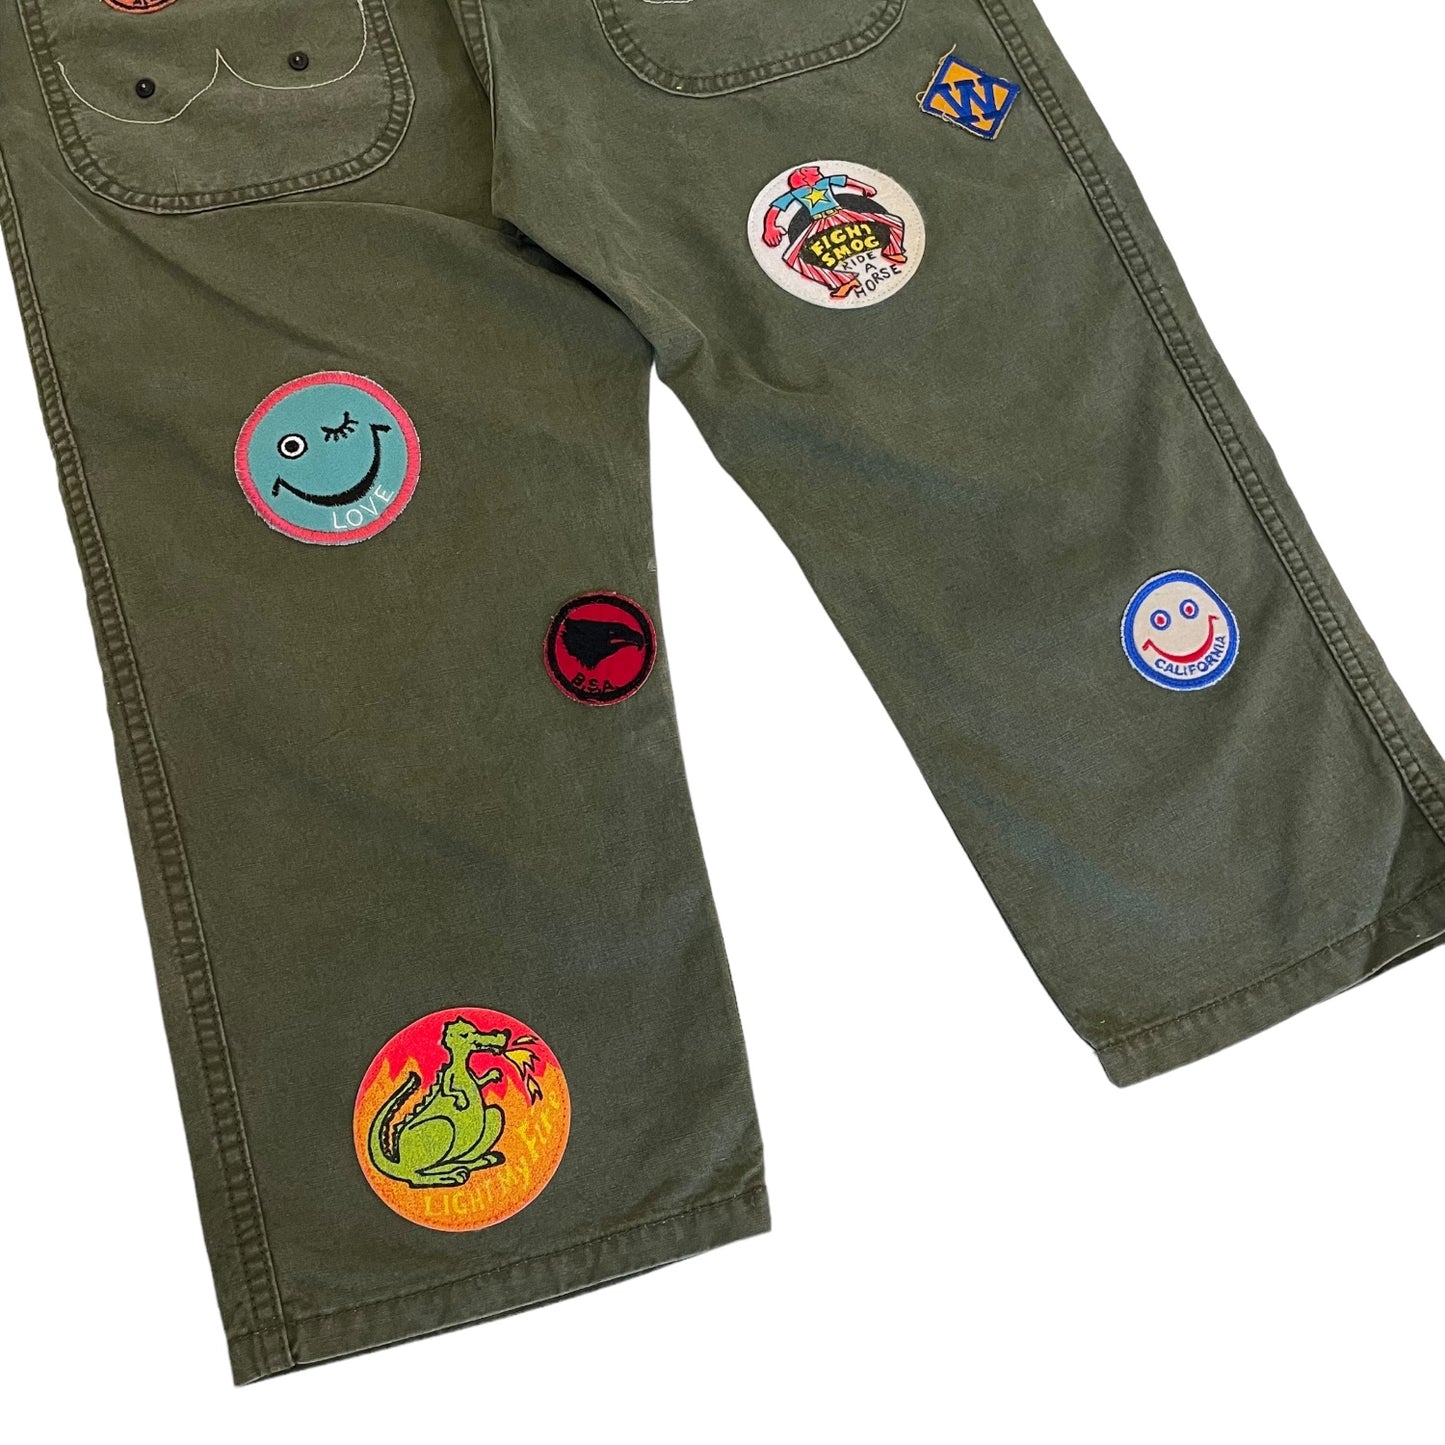 ALM original recycled vintage military tent overalls